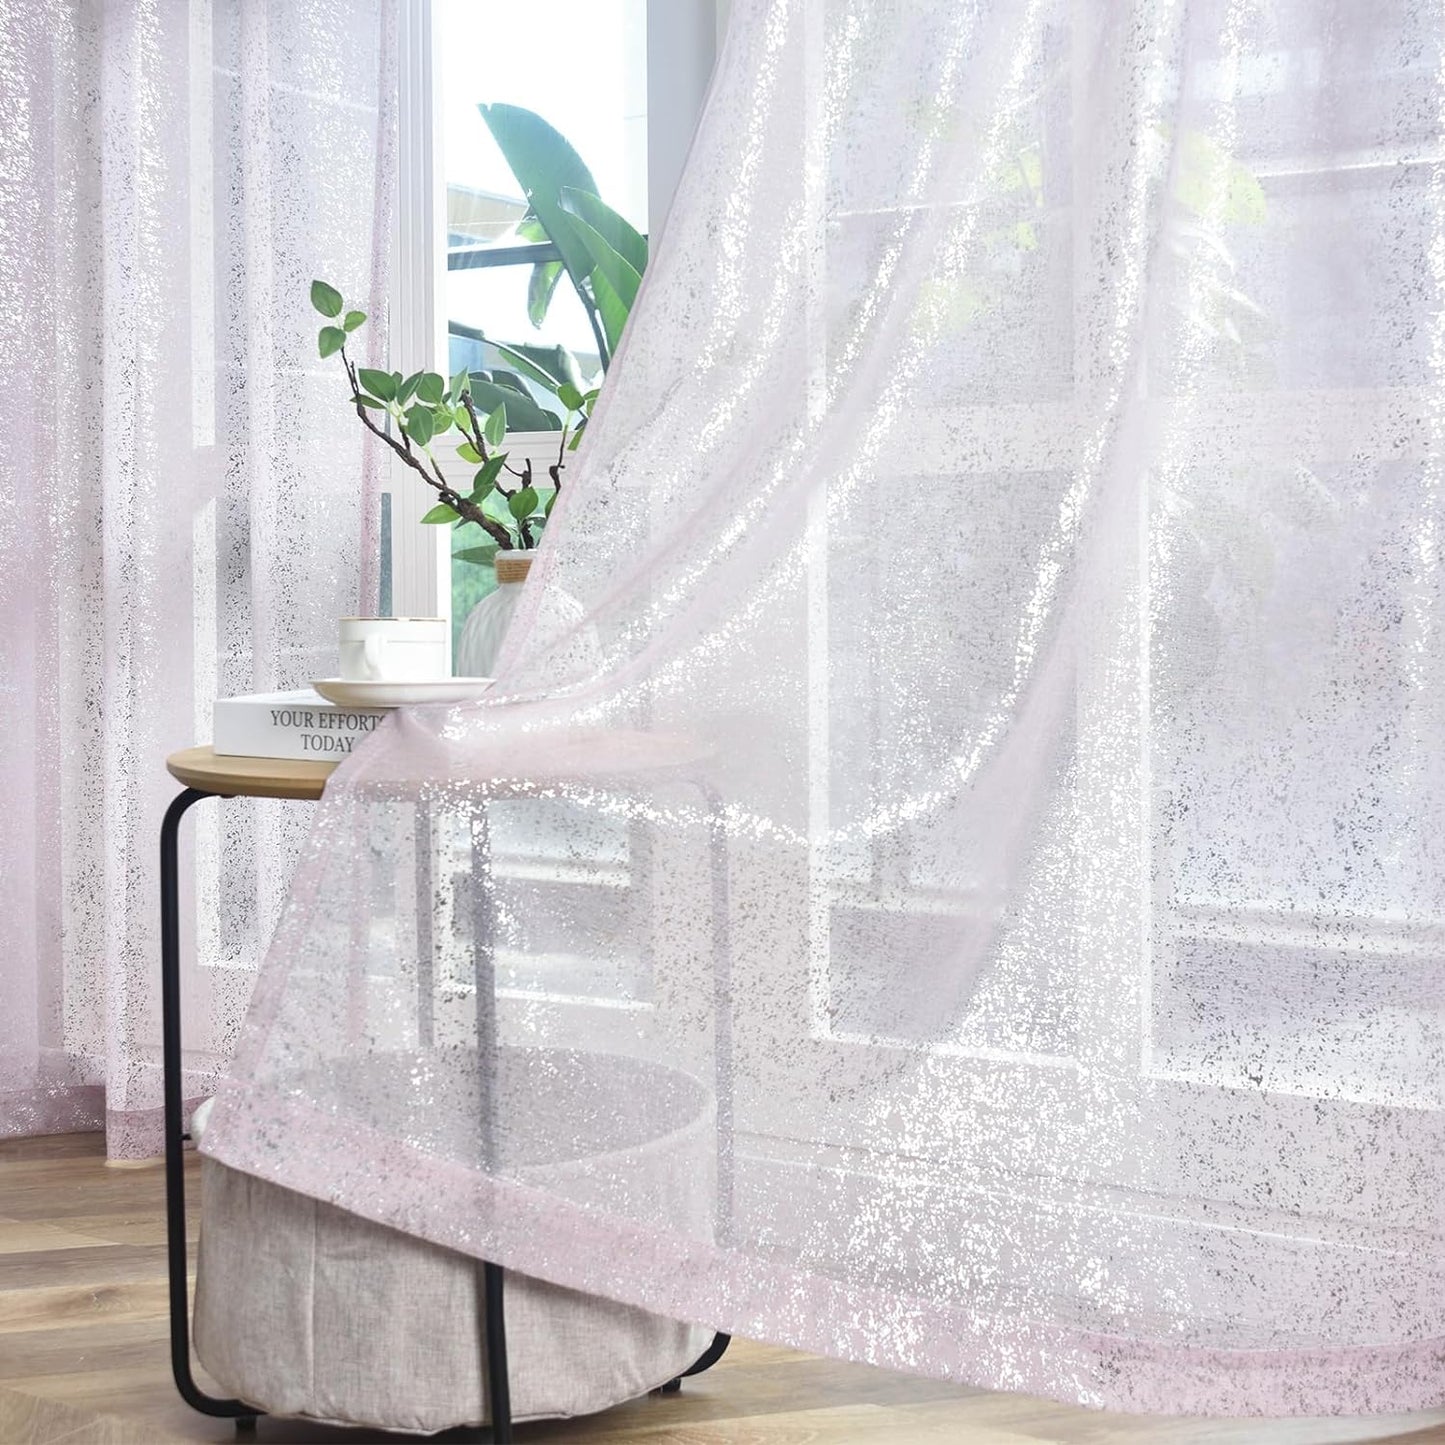 Silver Sheer Curtains 84 Inch Long - Chic Sparkle Curtains for Living Room, Rod Pocket Glitter Sheer Curtains for Windows Privacy Silver Grey Sheer Panels, 52 X 84 Inch, 2 Panels, Silver Gray  TERLYTEX Purple Silver W52 X L84 Inch|Pair 